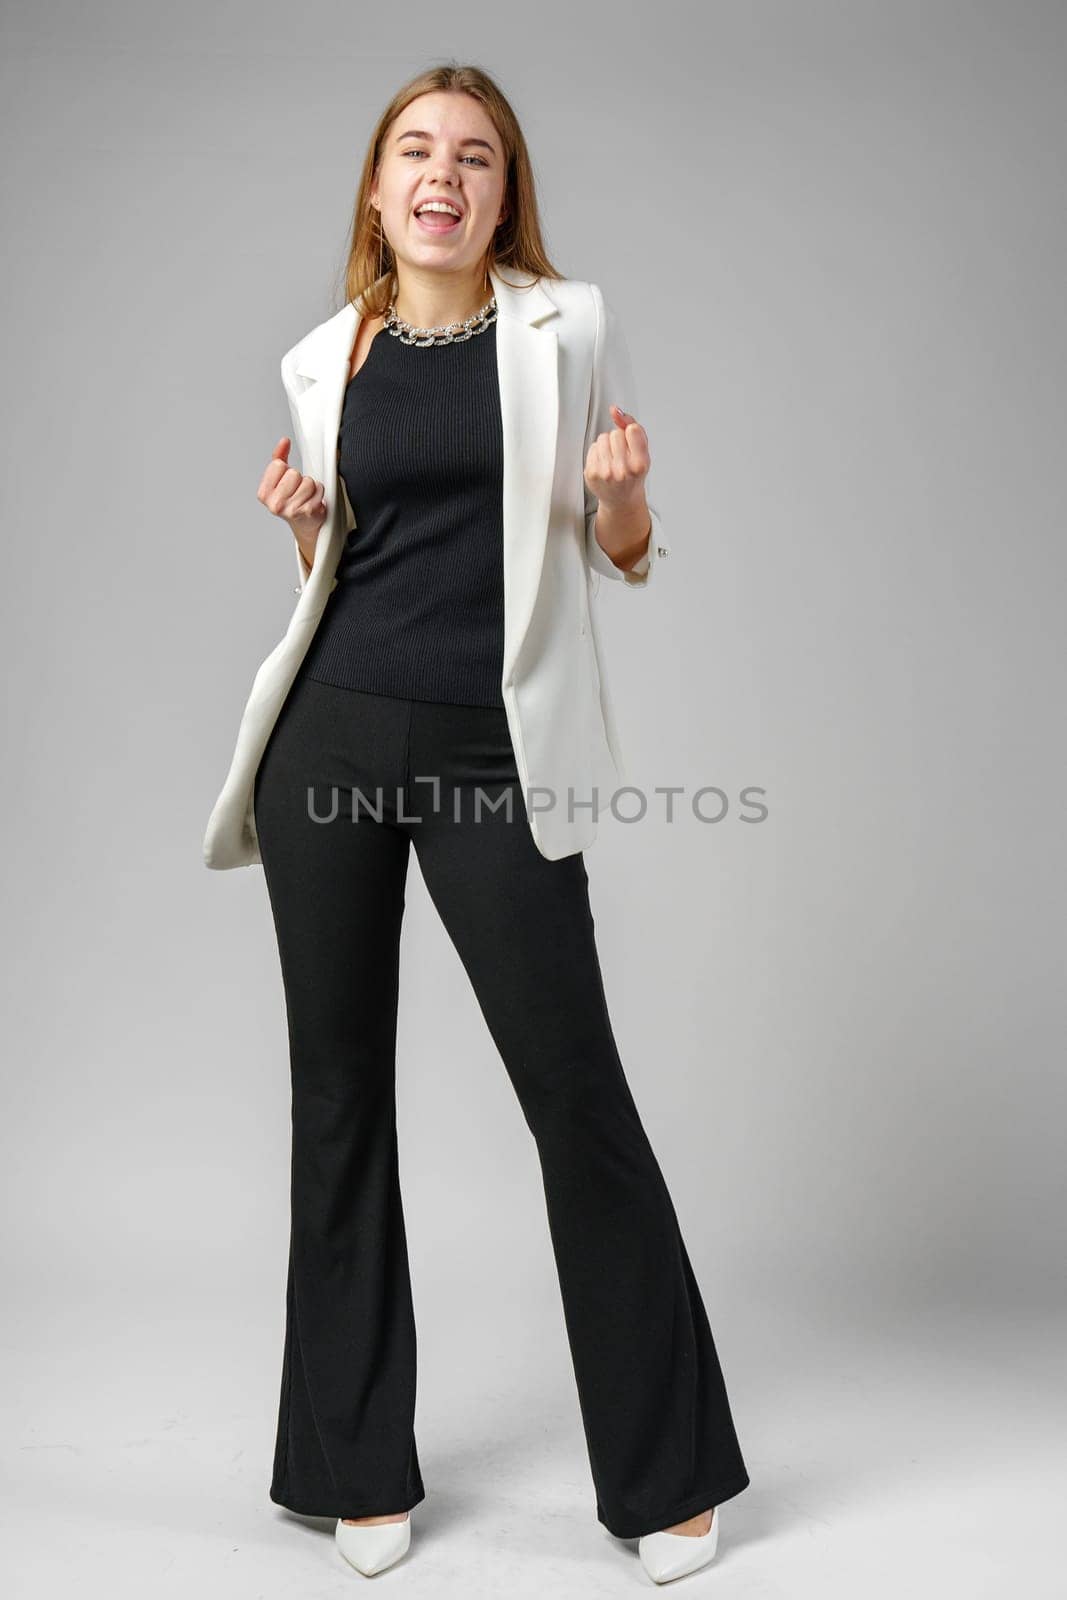 Confident Young Businesswoman Flexing Muscles in Smart Casual Attire Against Grey Background by Fabrikasimf